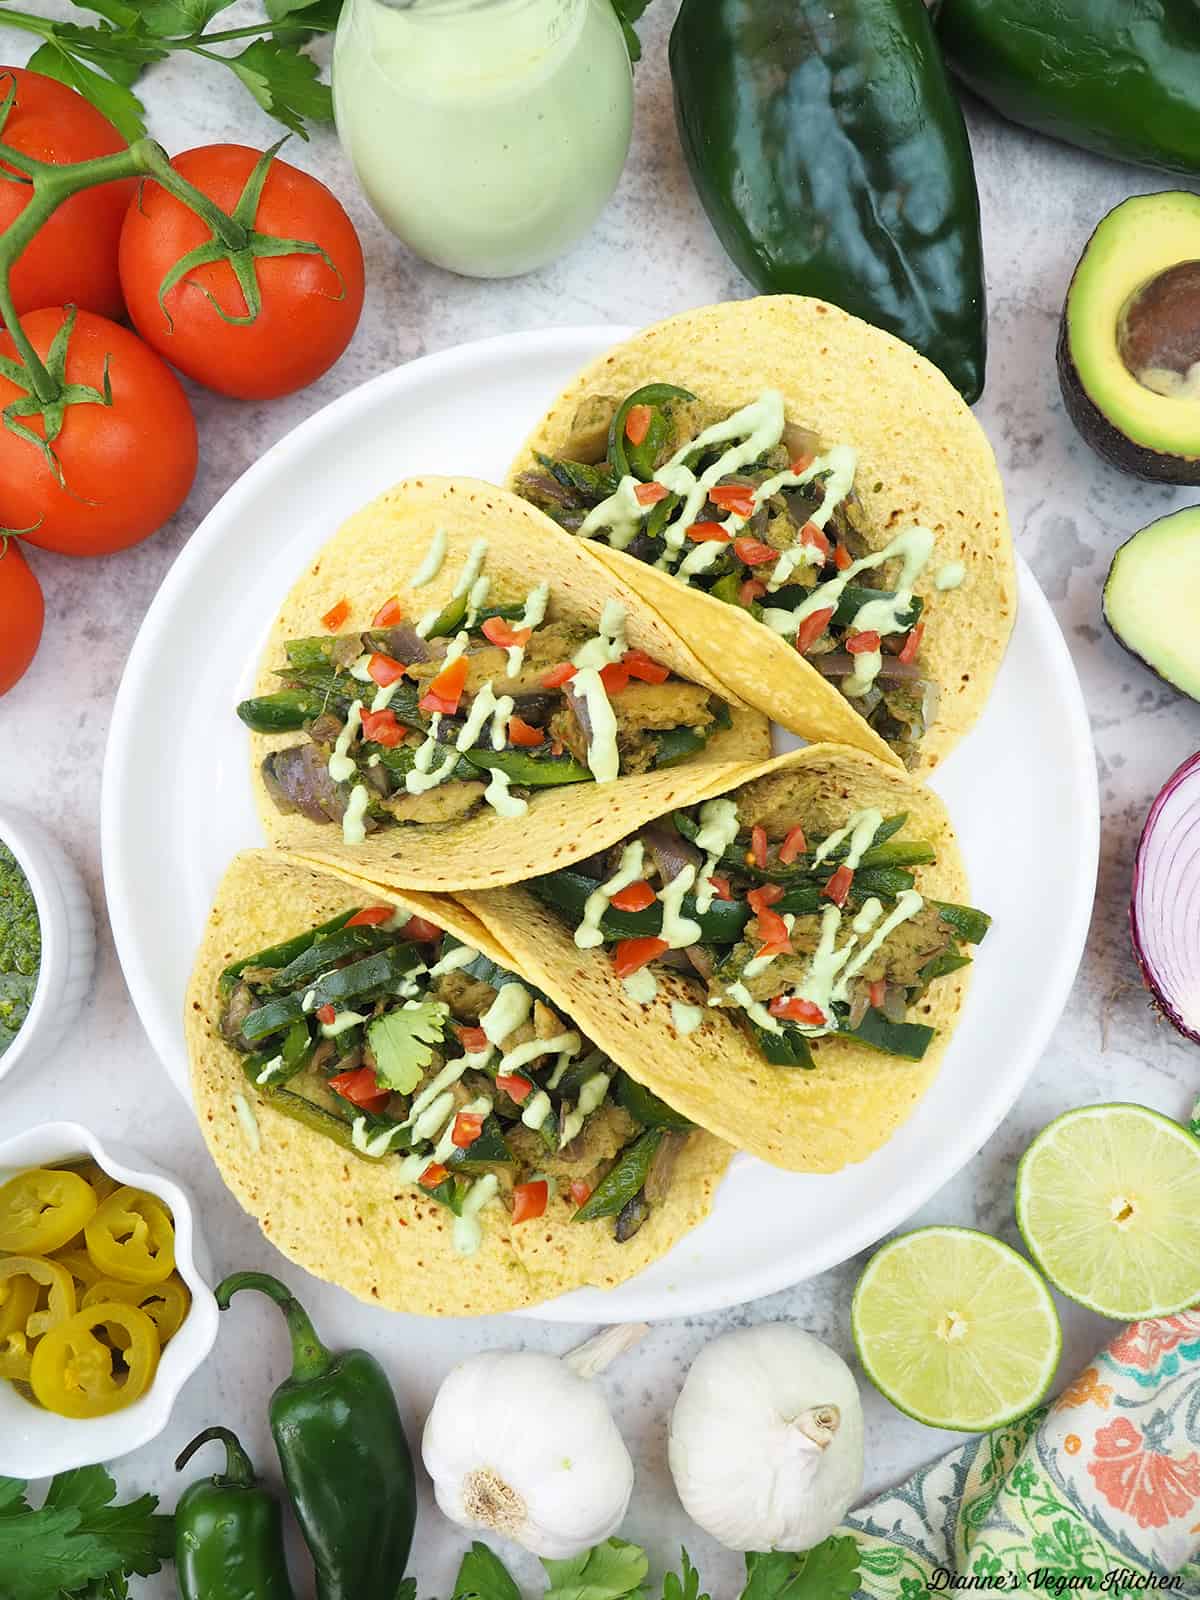 Seitan Chimichurri Tacos surrounded by tomatoes, jalapeño lime aioli, peppers, avocado, limes, garlic, onions, chimichurri sauce, and jalapeño slices